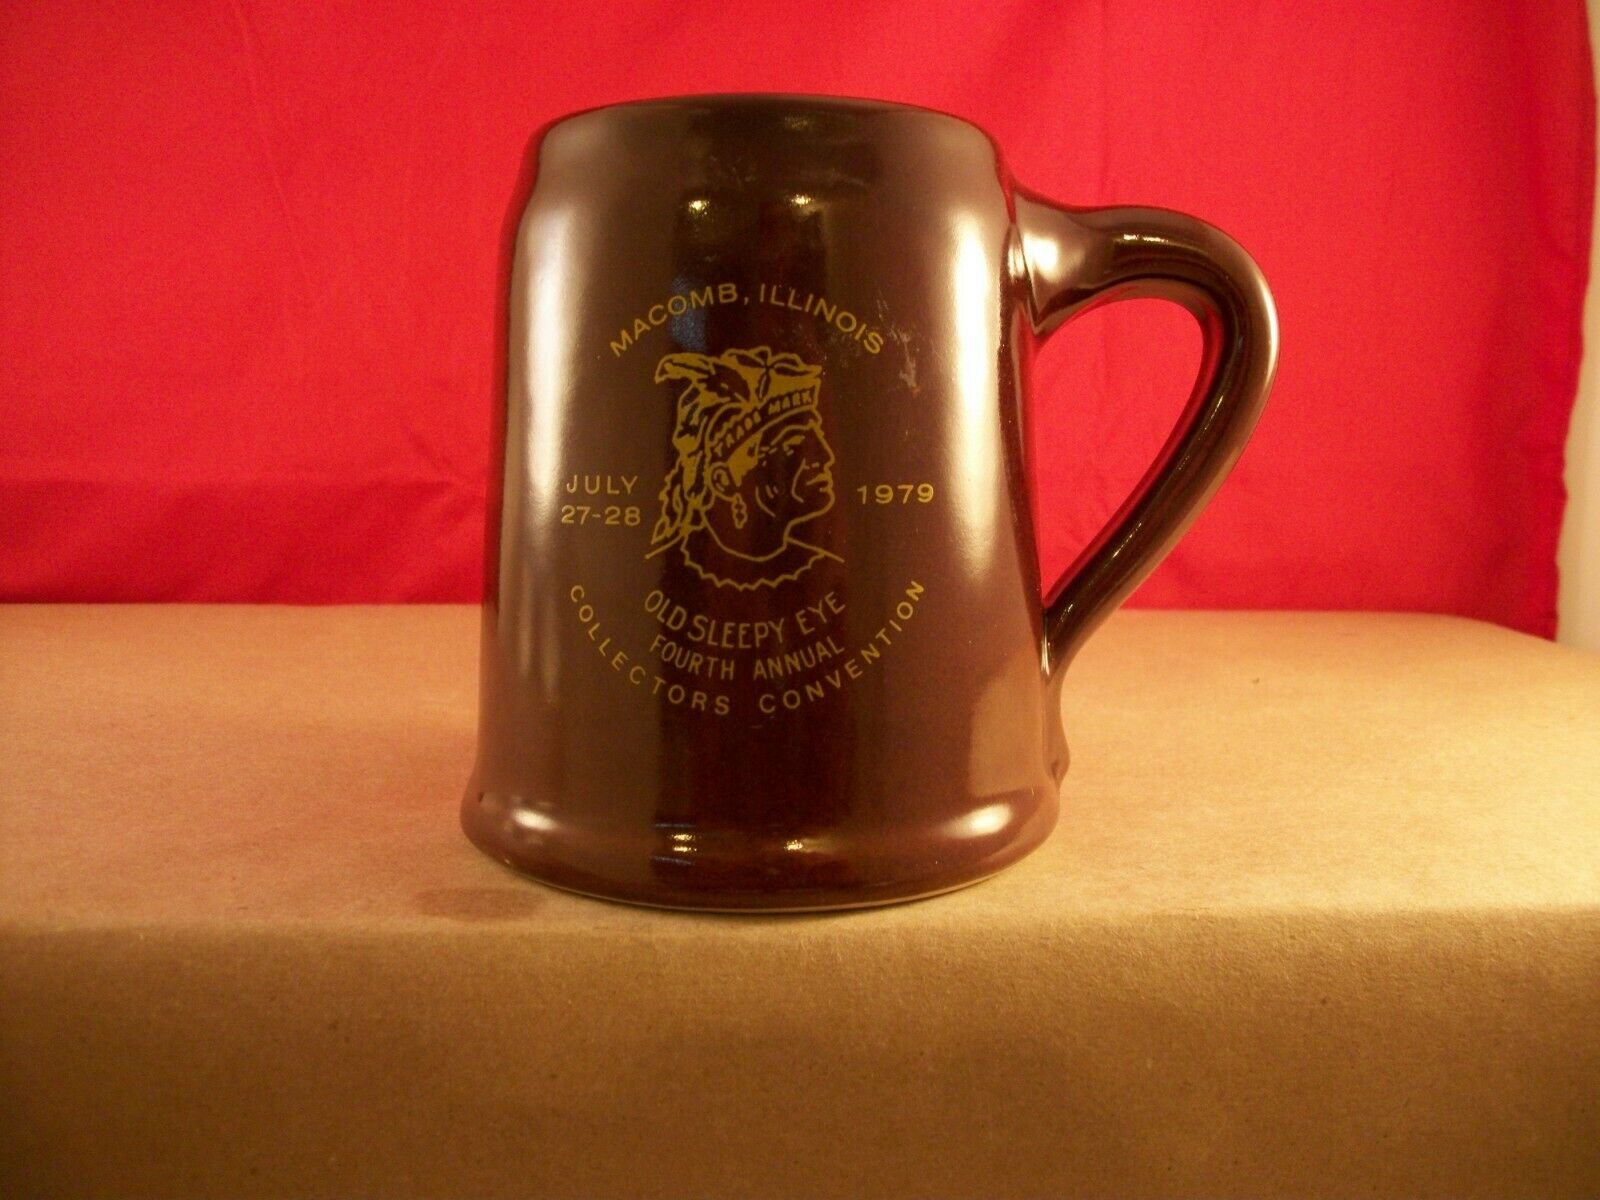 4th Annual Old Sleepy Eye Stoneware Collectors Pottery Convention Mug -1979